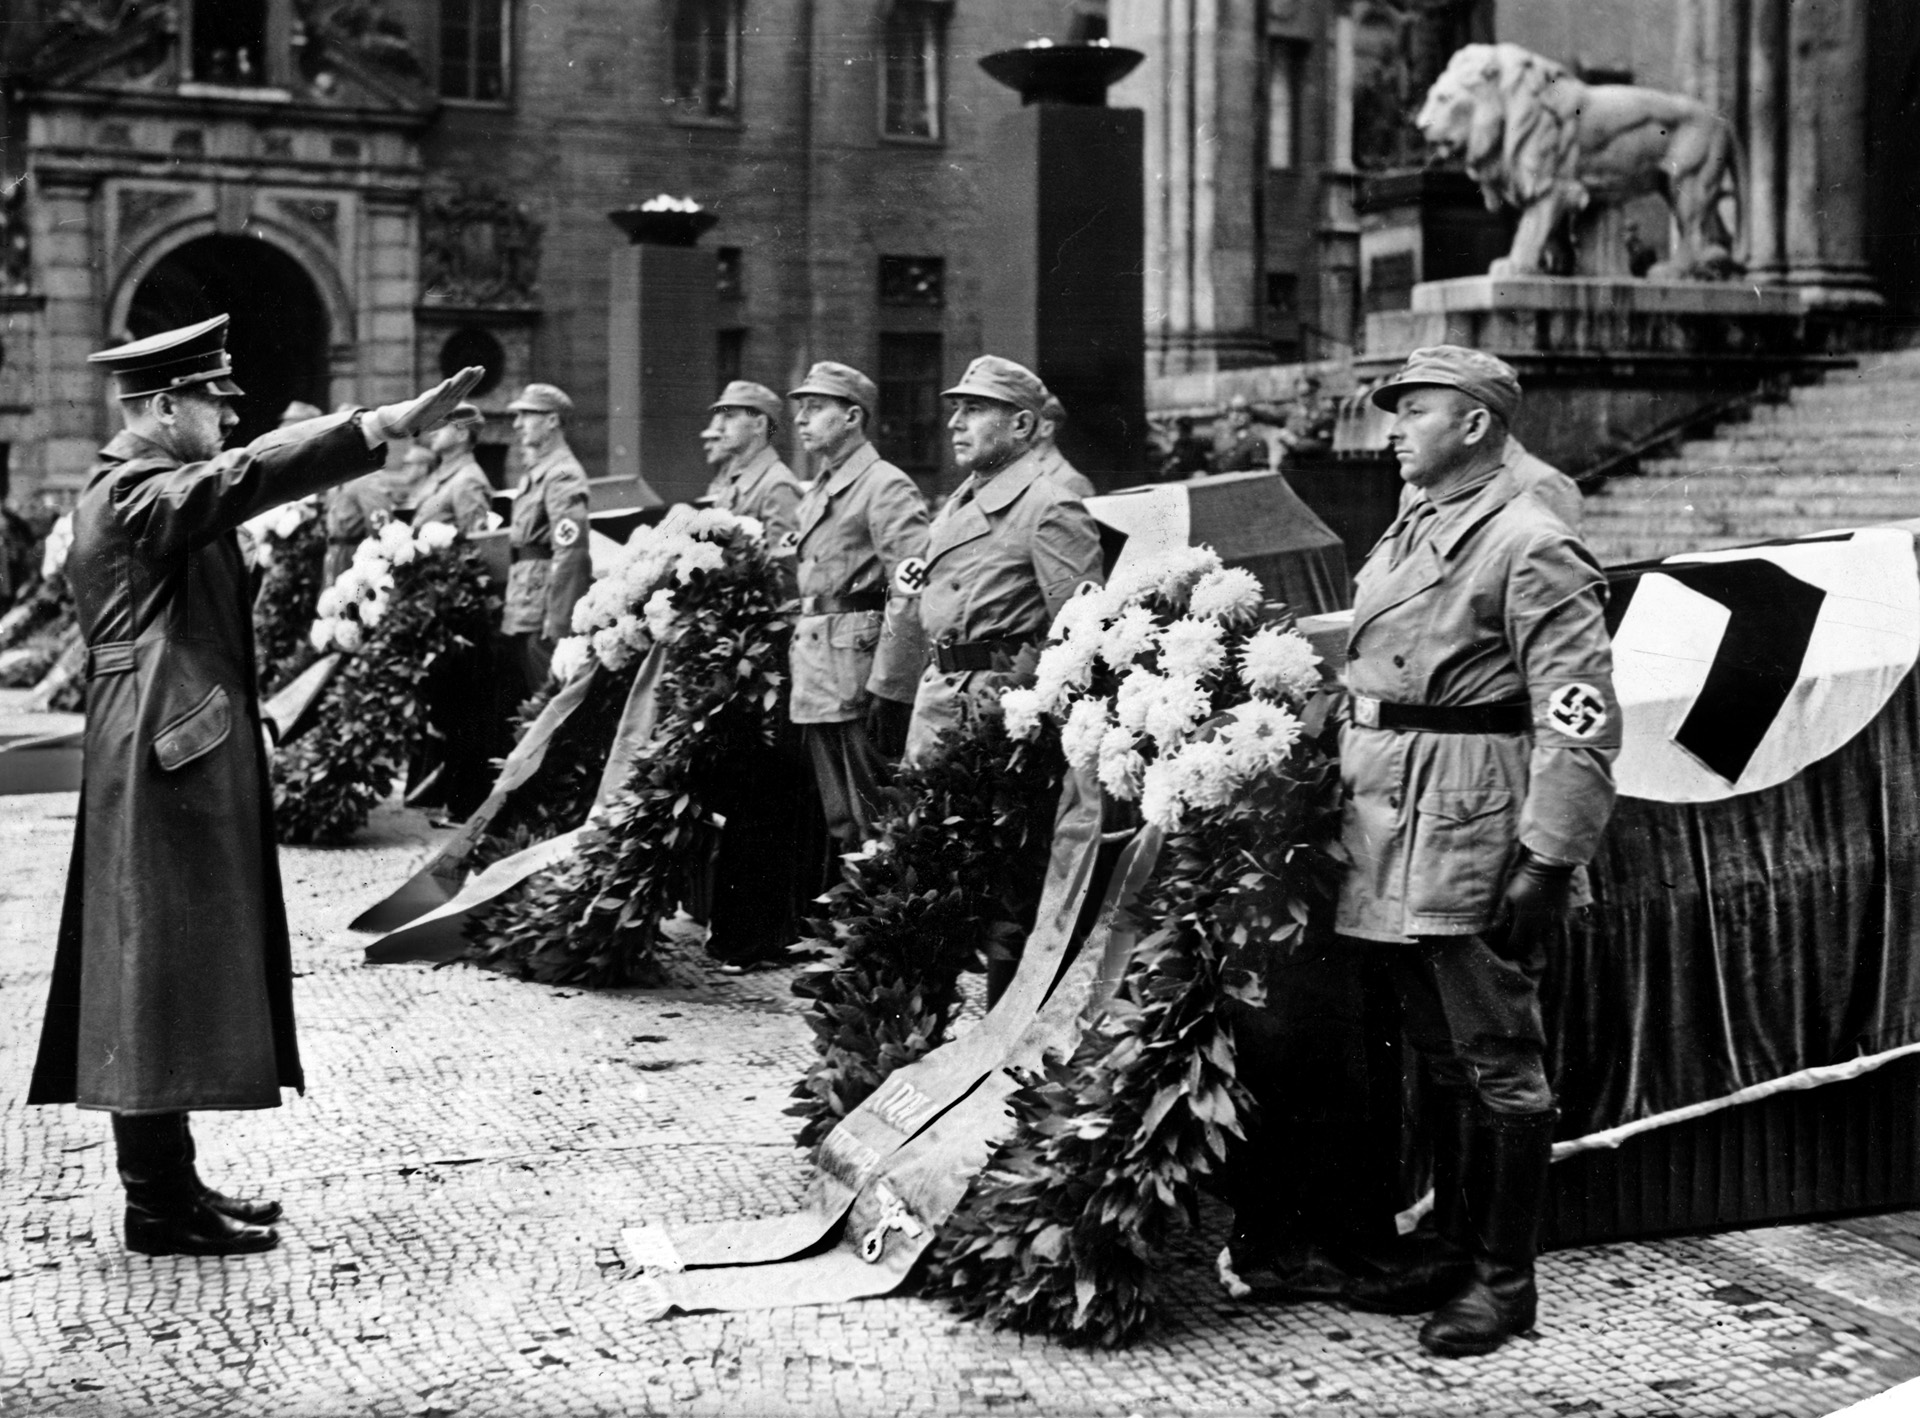 Adolf Hitler gives a stiff Nazi salute to seven men killed in an assassination attempt in Munich during the 1939 anniversary observances of the failed Munich Beer Hall Putsch of 1923.